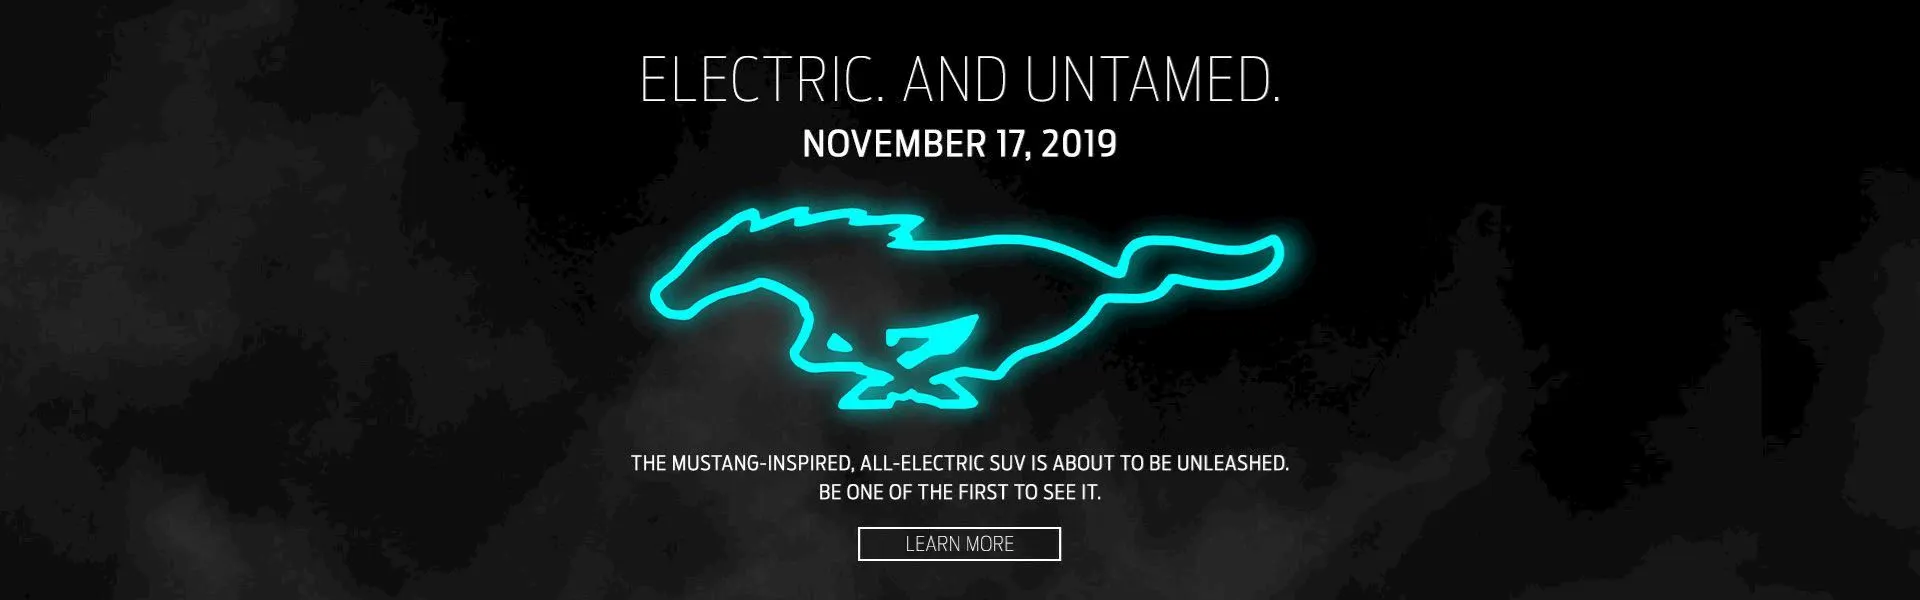 Electric. Untamed. The all new Mustang inspired all-electric SUV Reveal